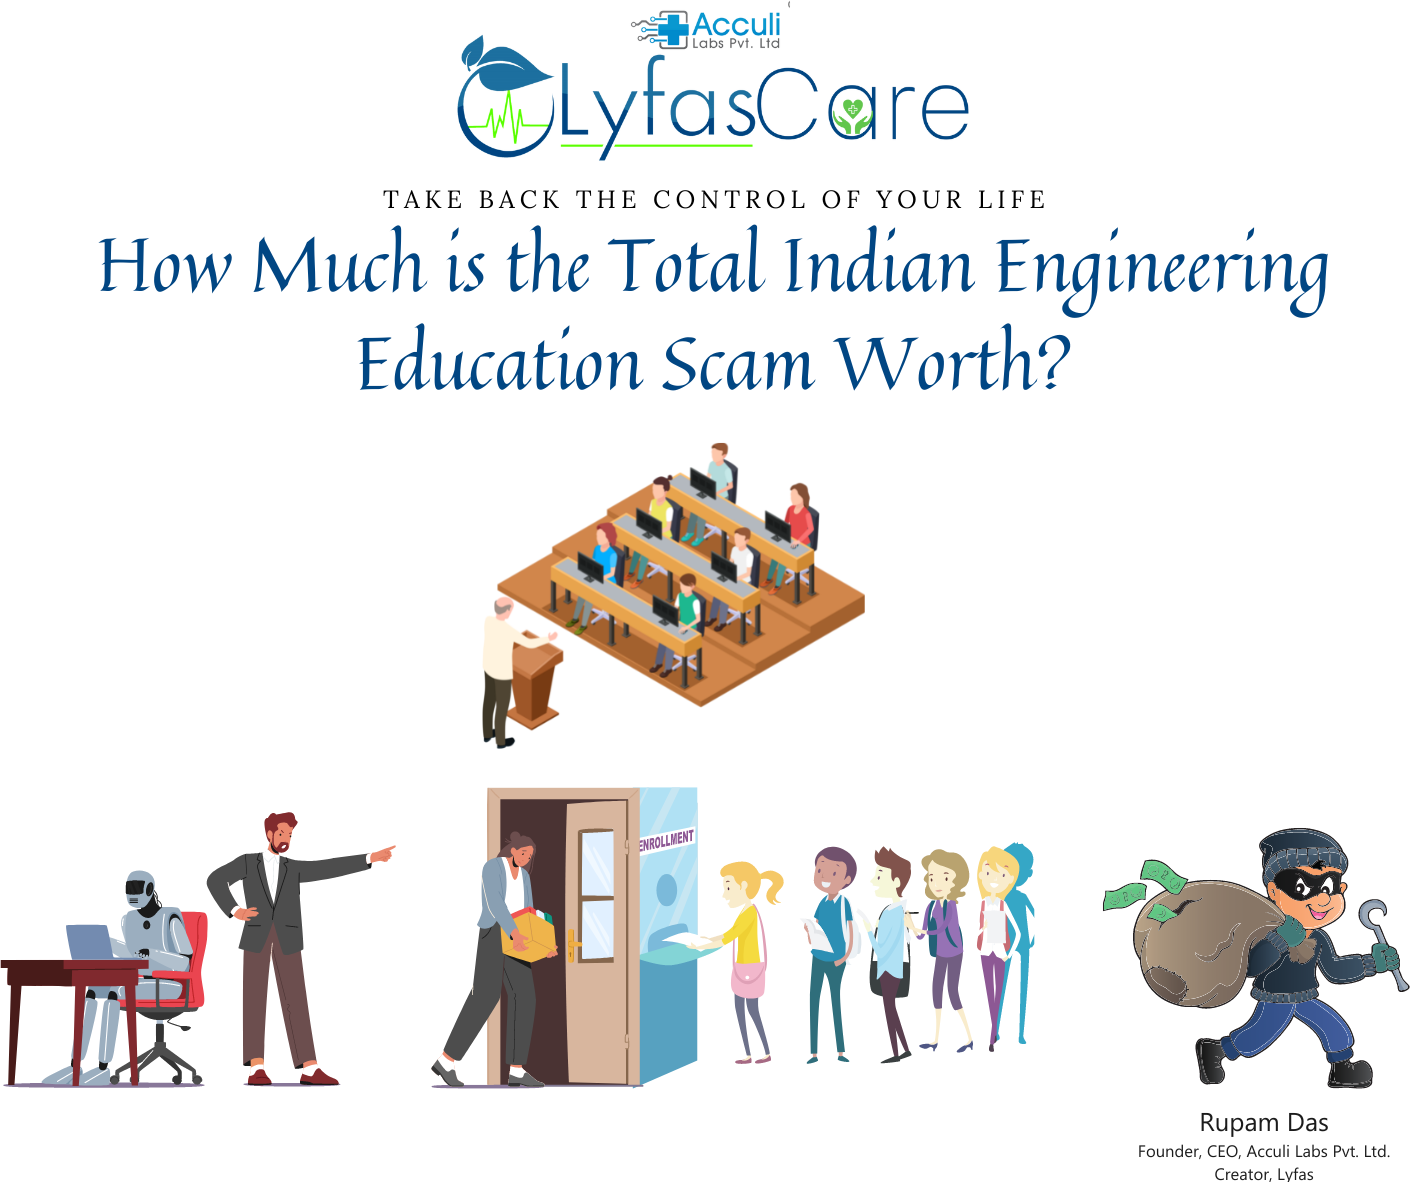 How Much is the Total Indian Engineering Education Scam Worth